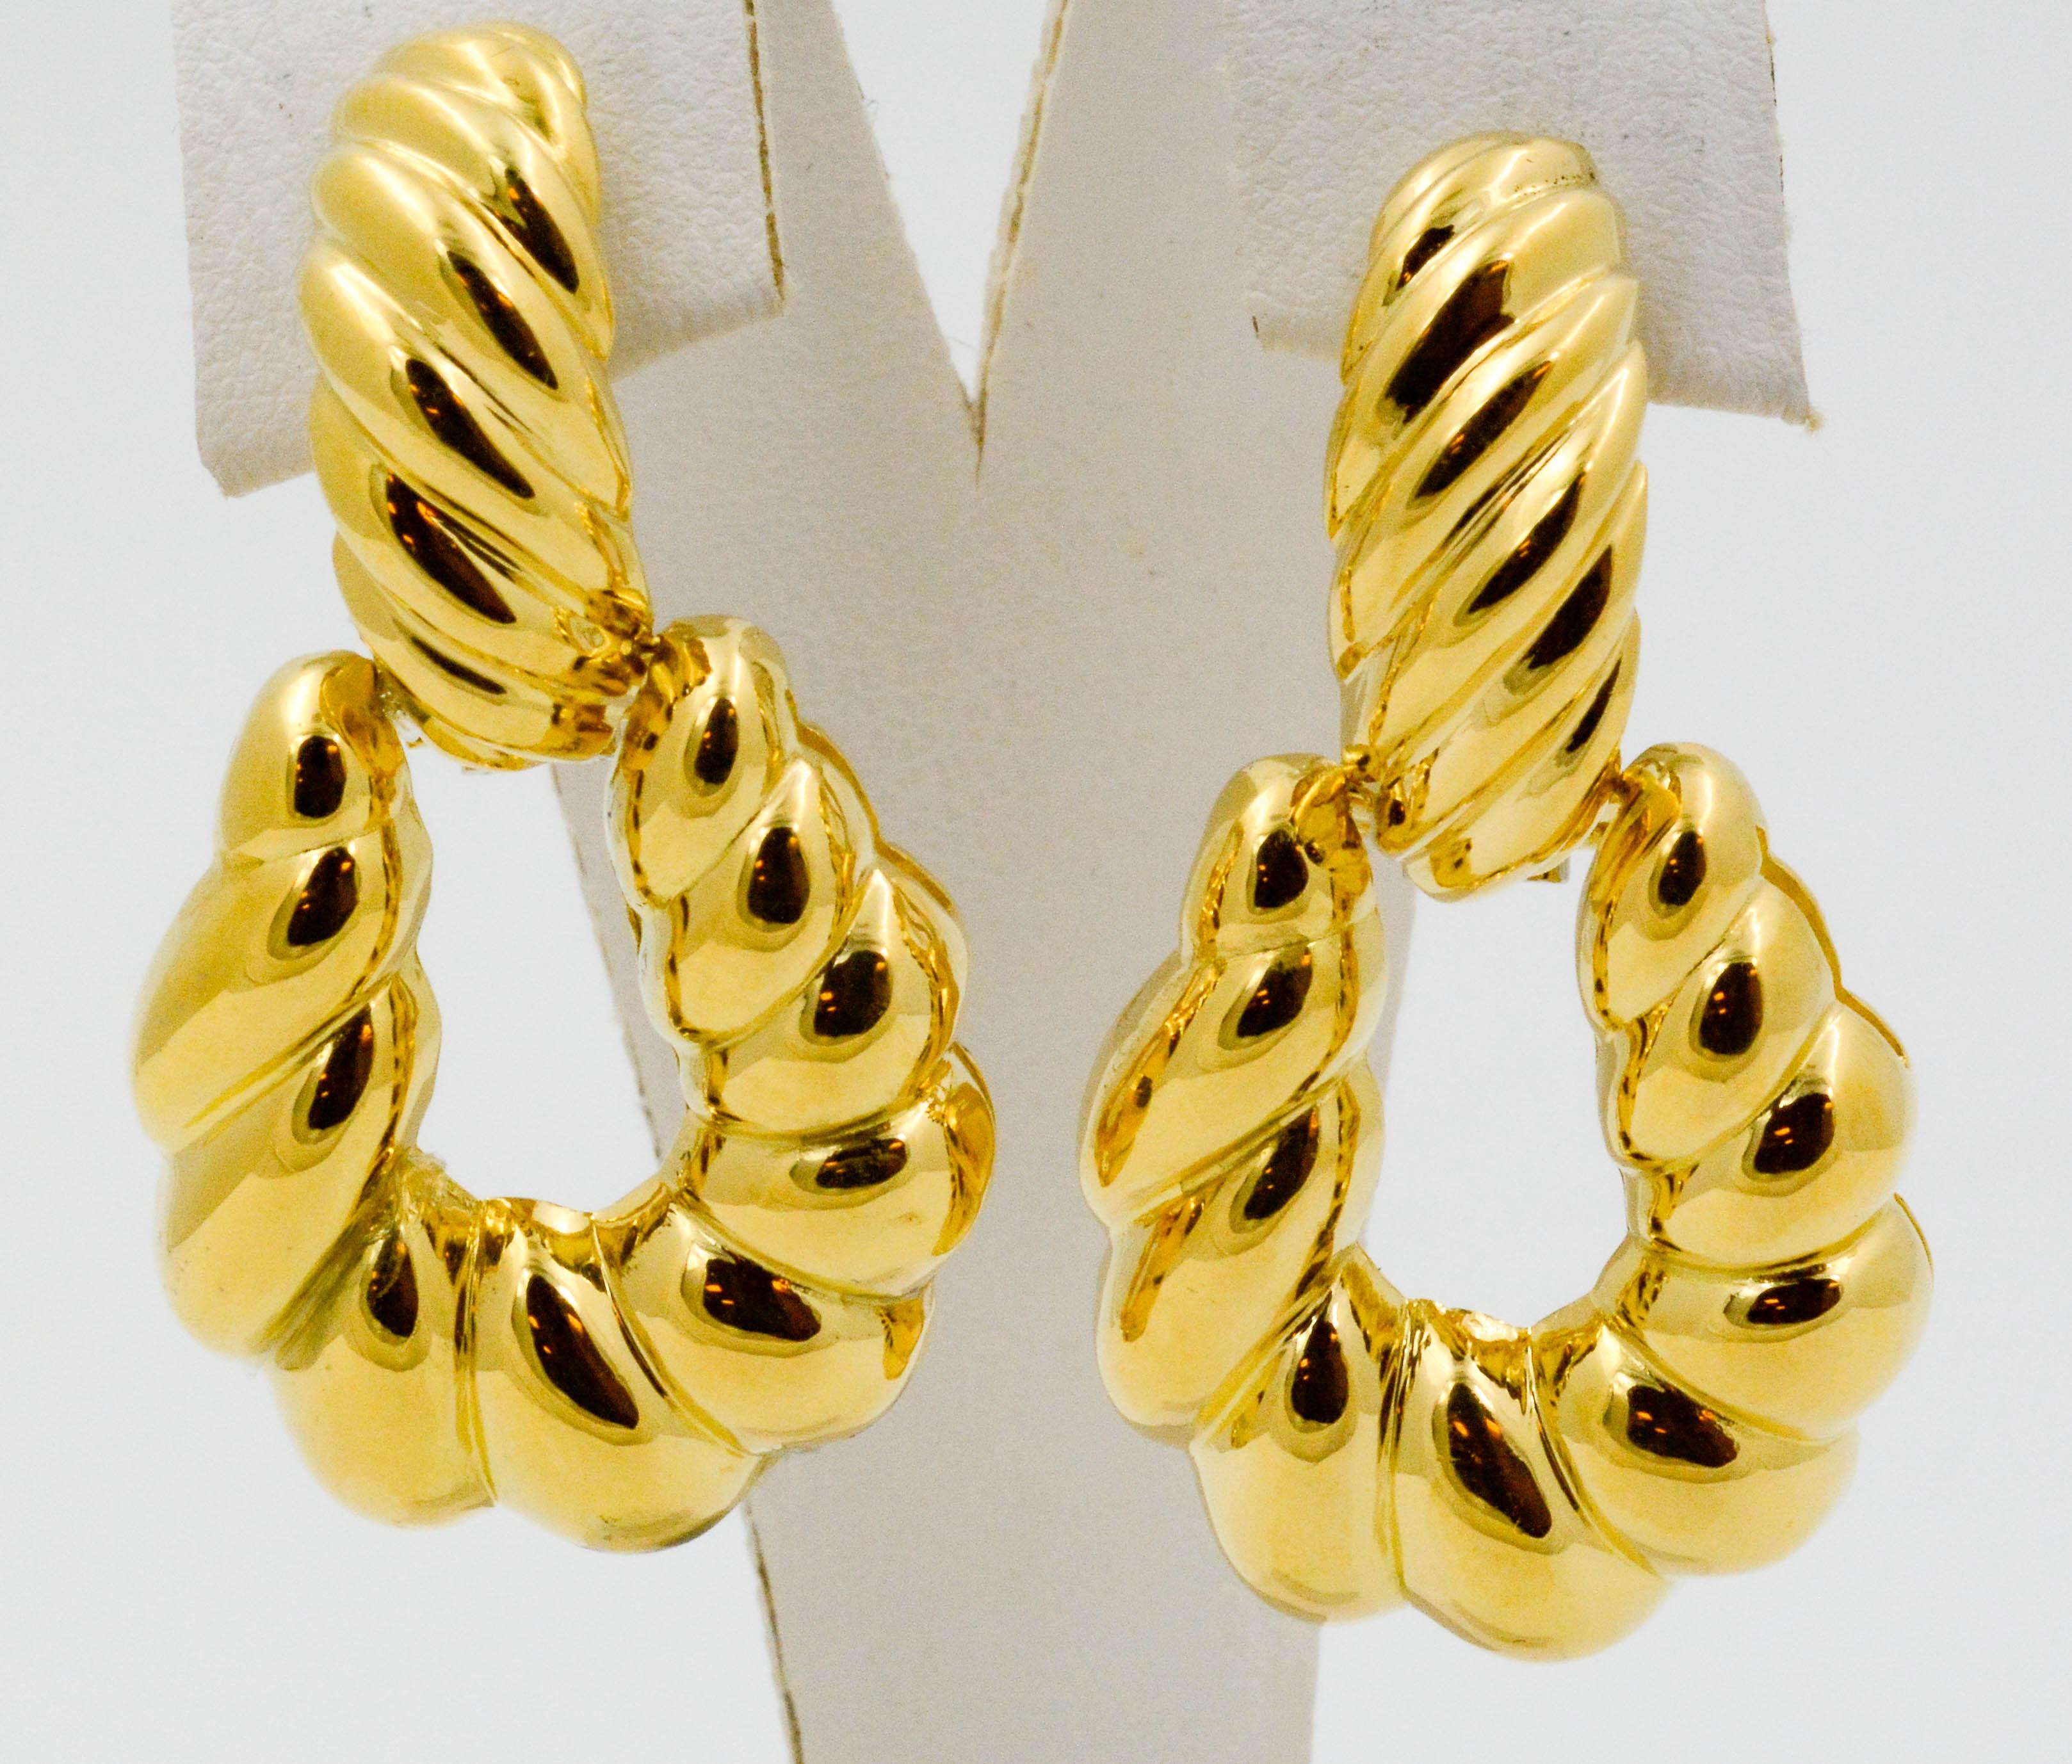 Circa 1980's 18 karat Italian yellow gold ridged door knocker clip-on earrings with clip back. Delightfully light and comfortable to wear.